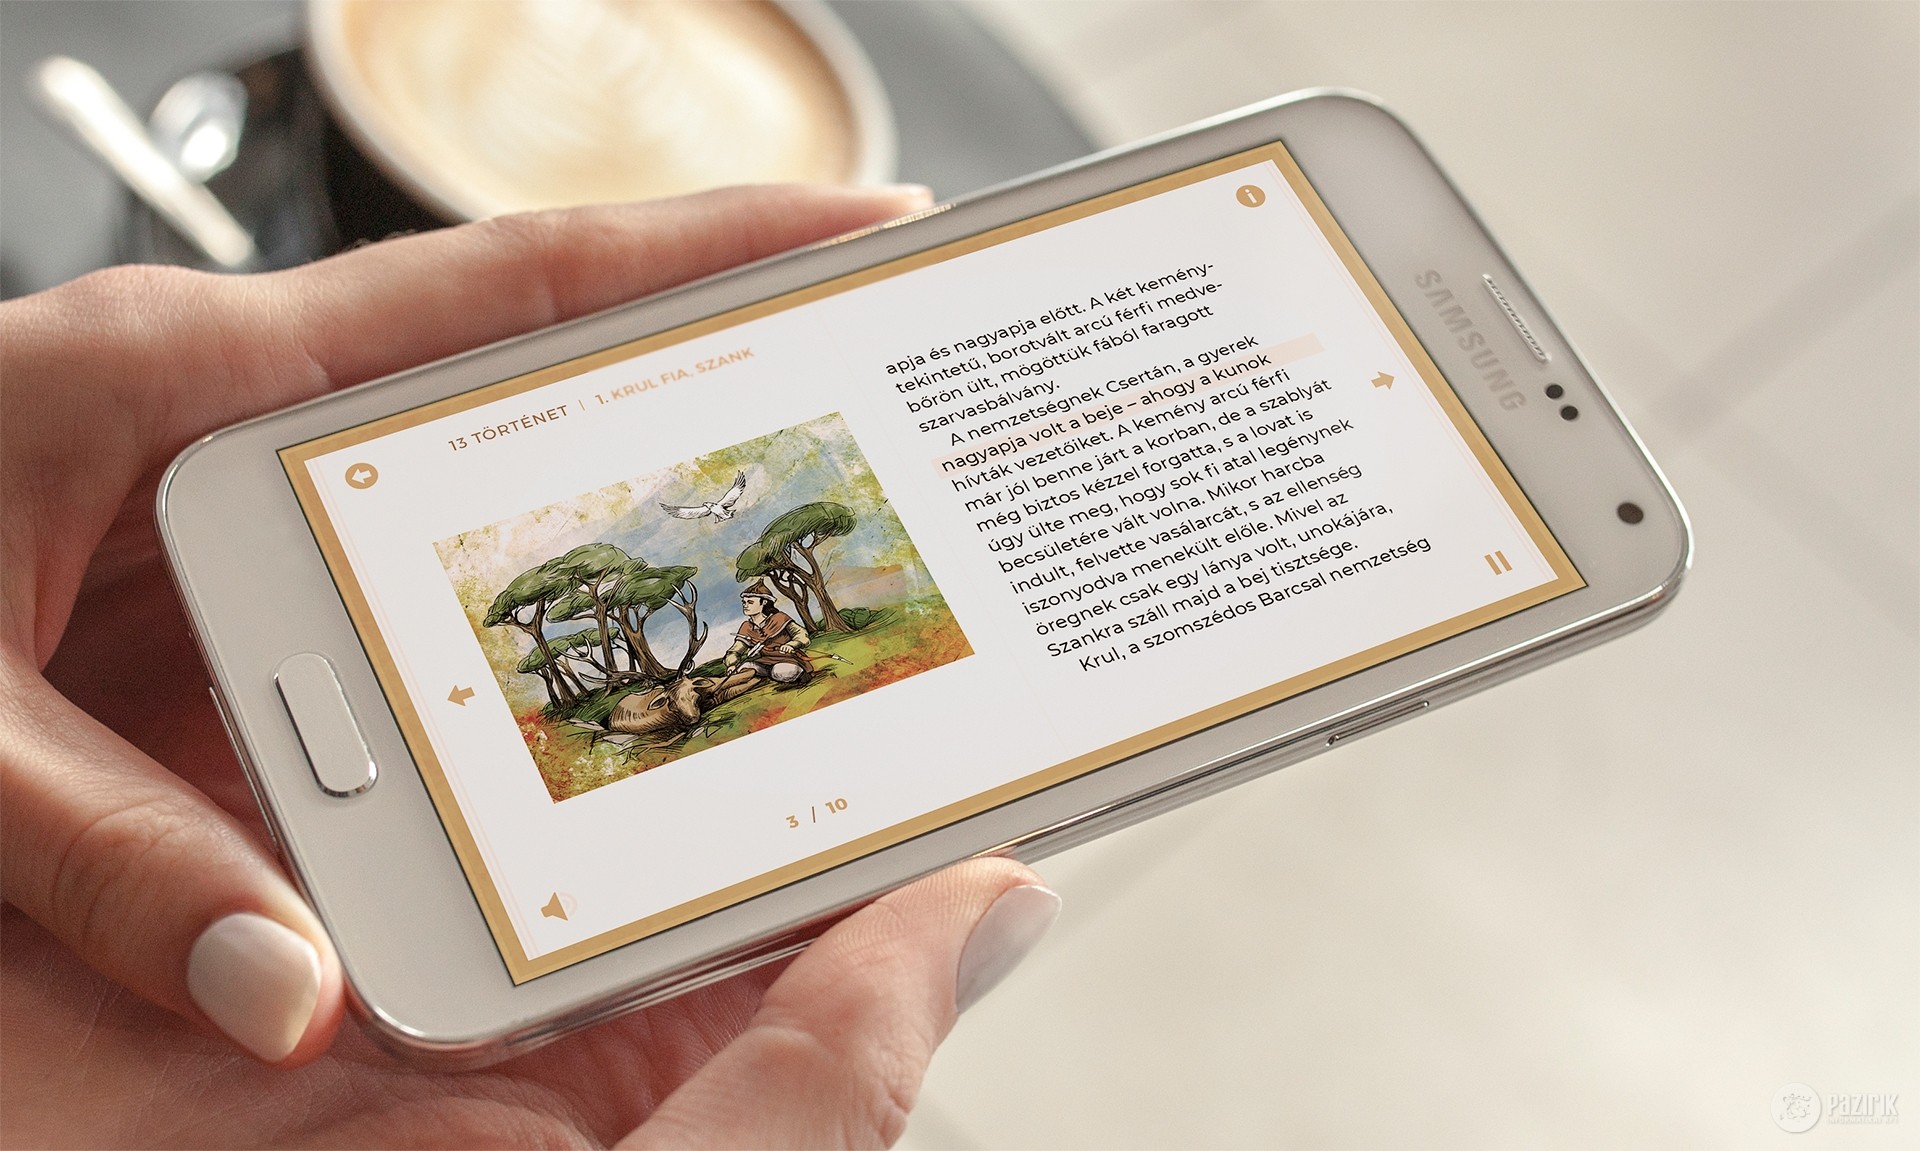 The Cuman stories Storybook application - Software